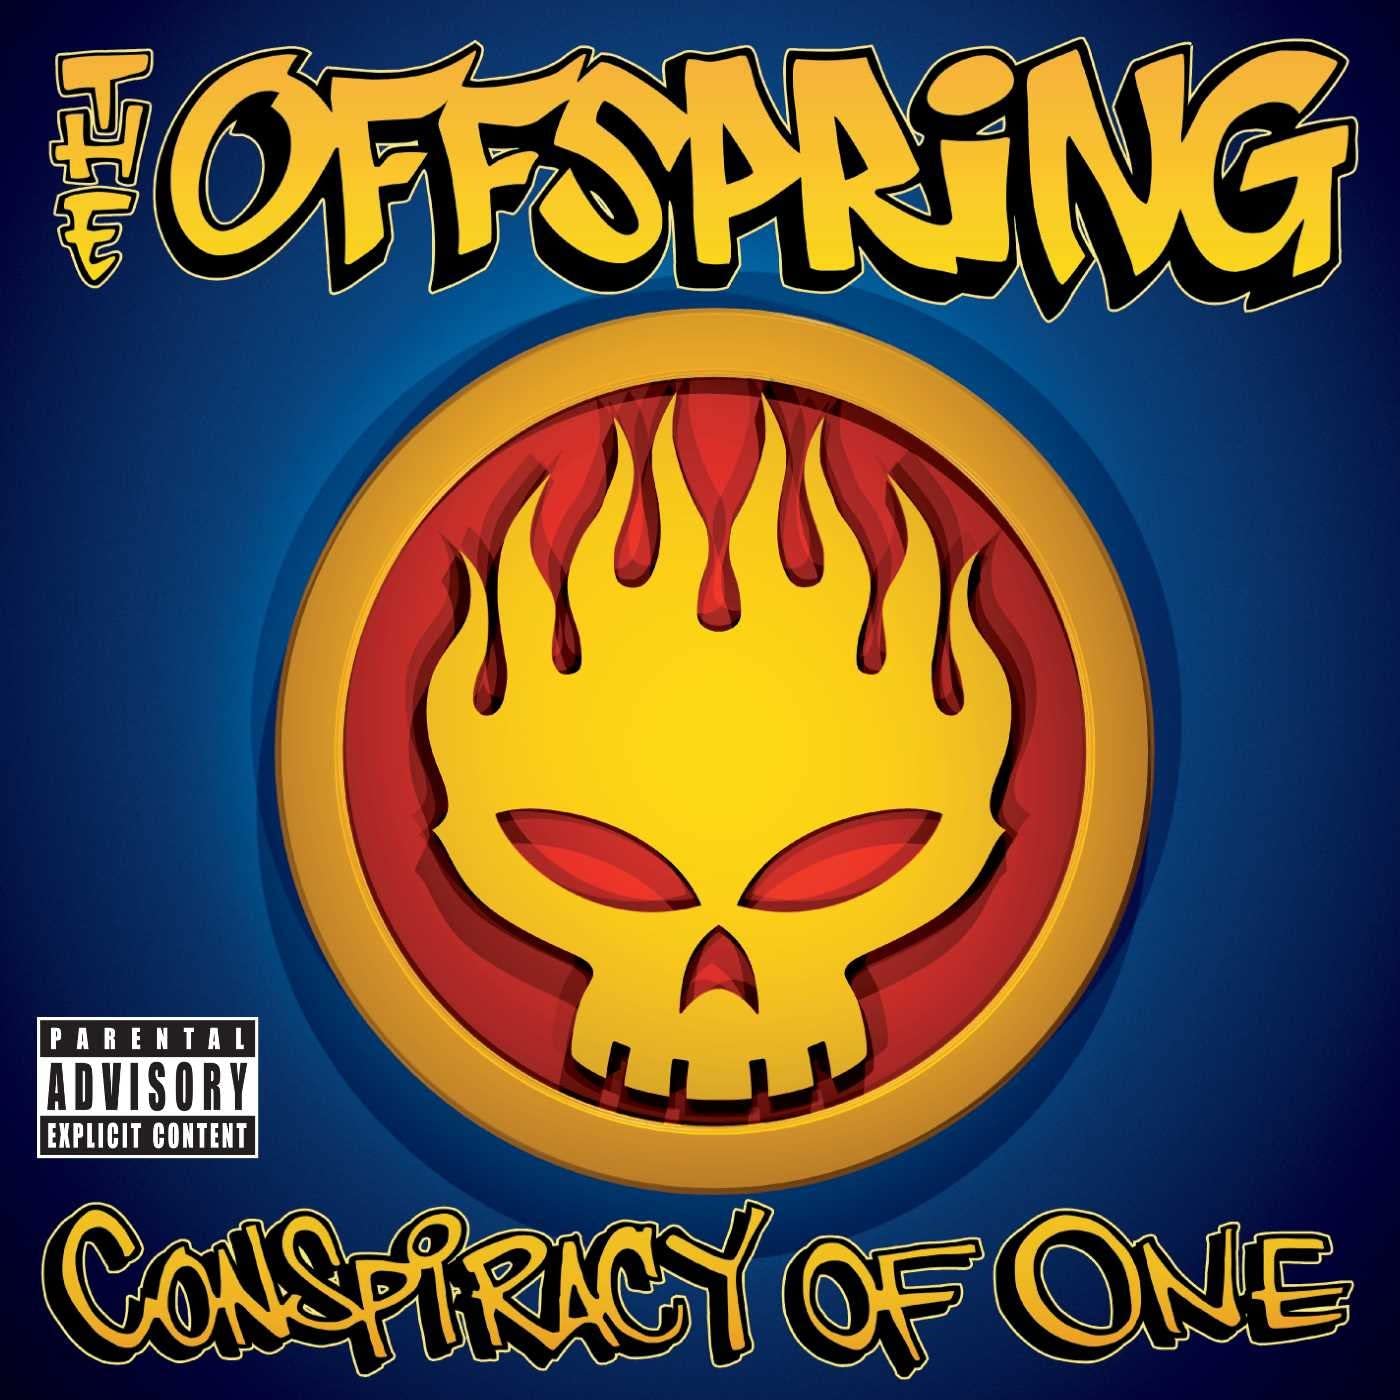 Conspiracy Of One | The Offspring